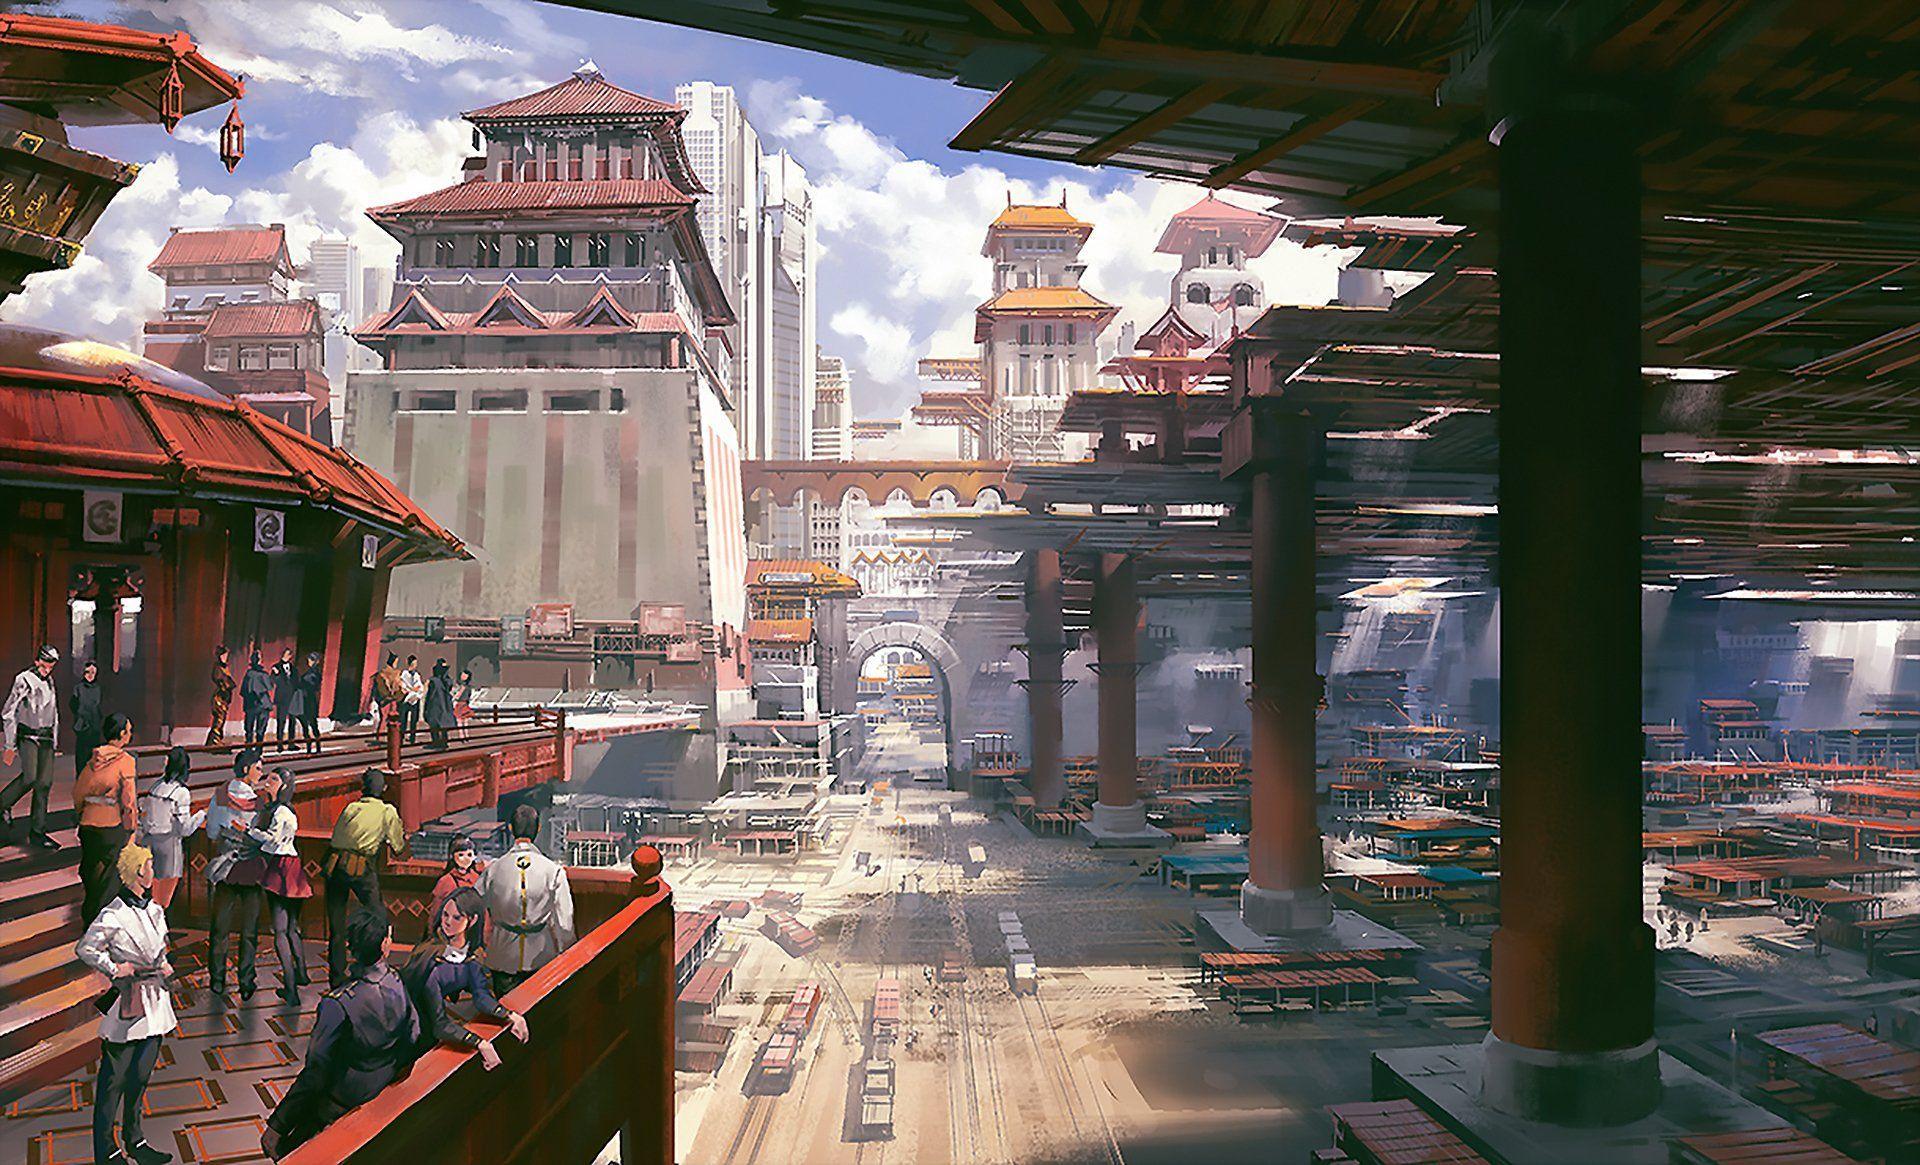 Anime Architecture exhibition shows fictional worlds of Japan's anime films